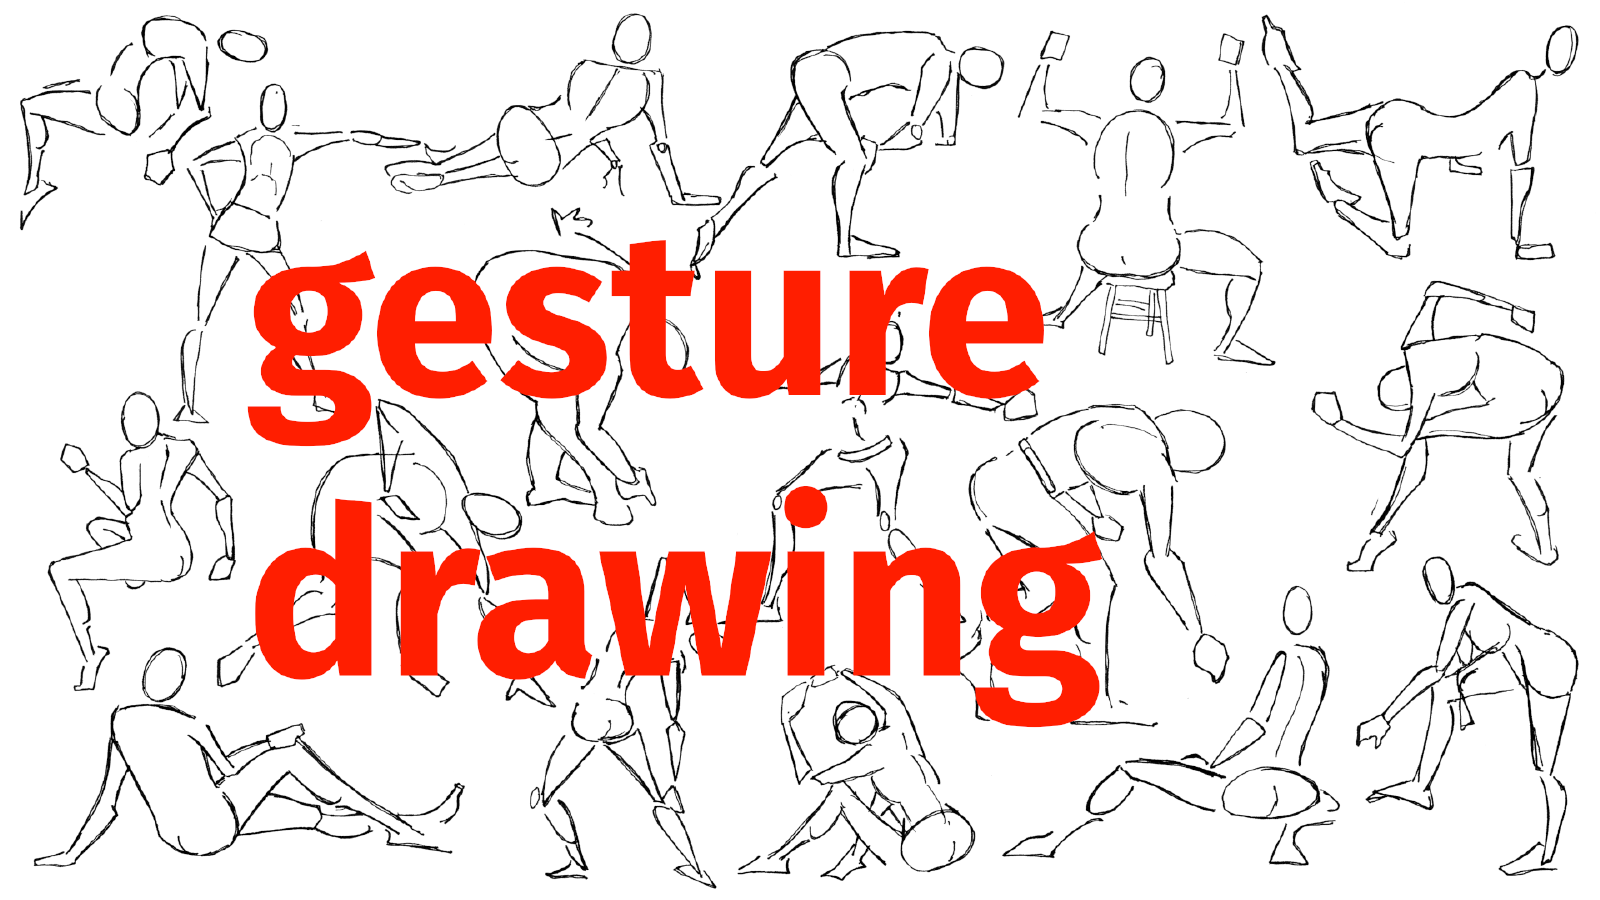 Slide image for the practice drawing textures exercise